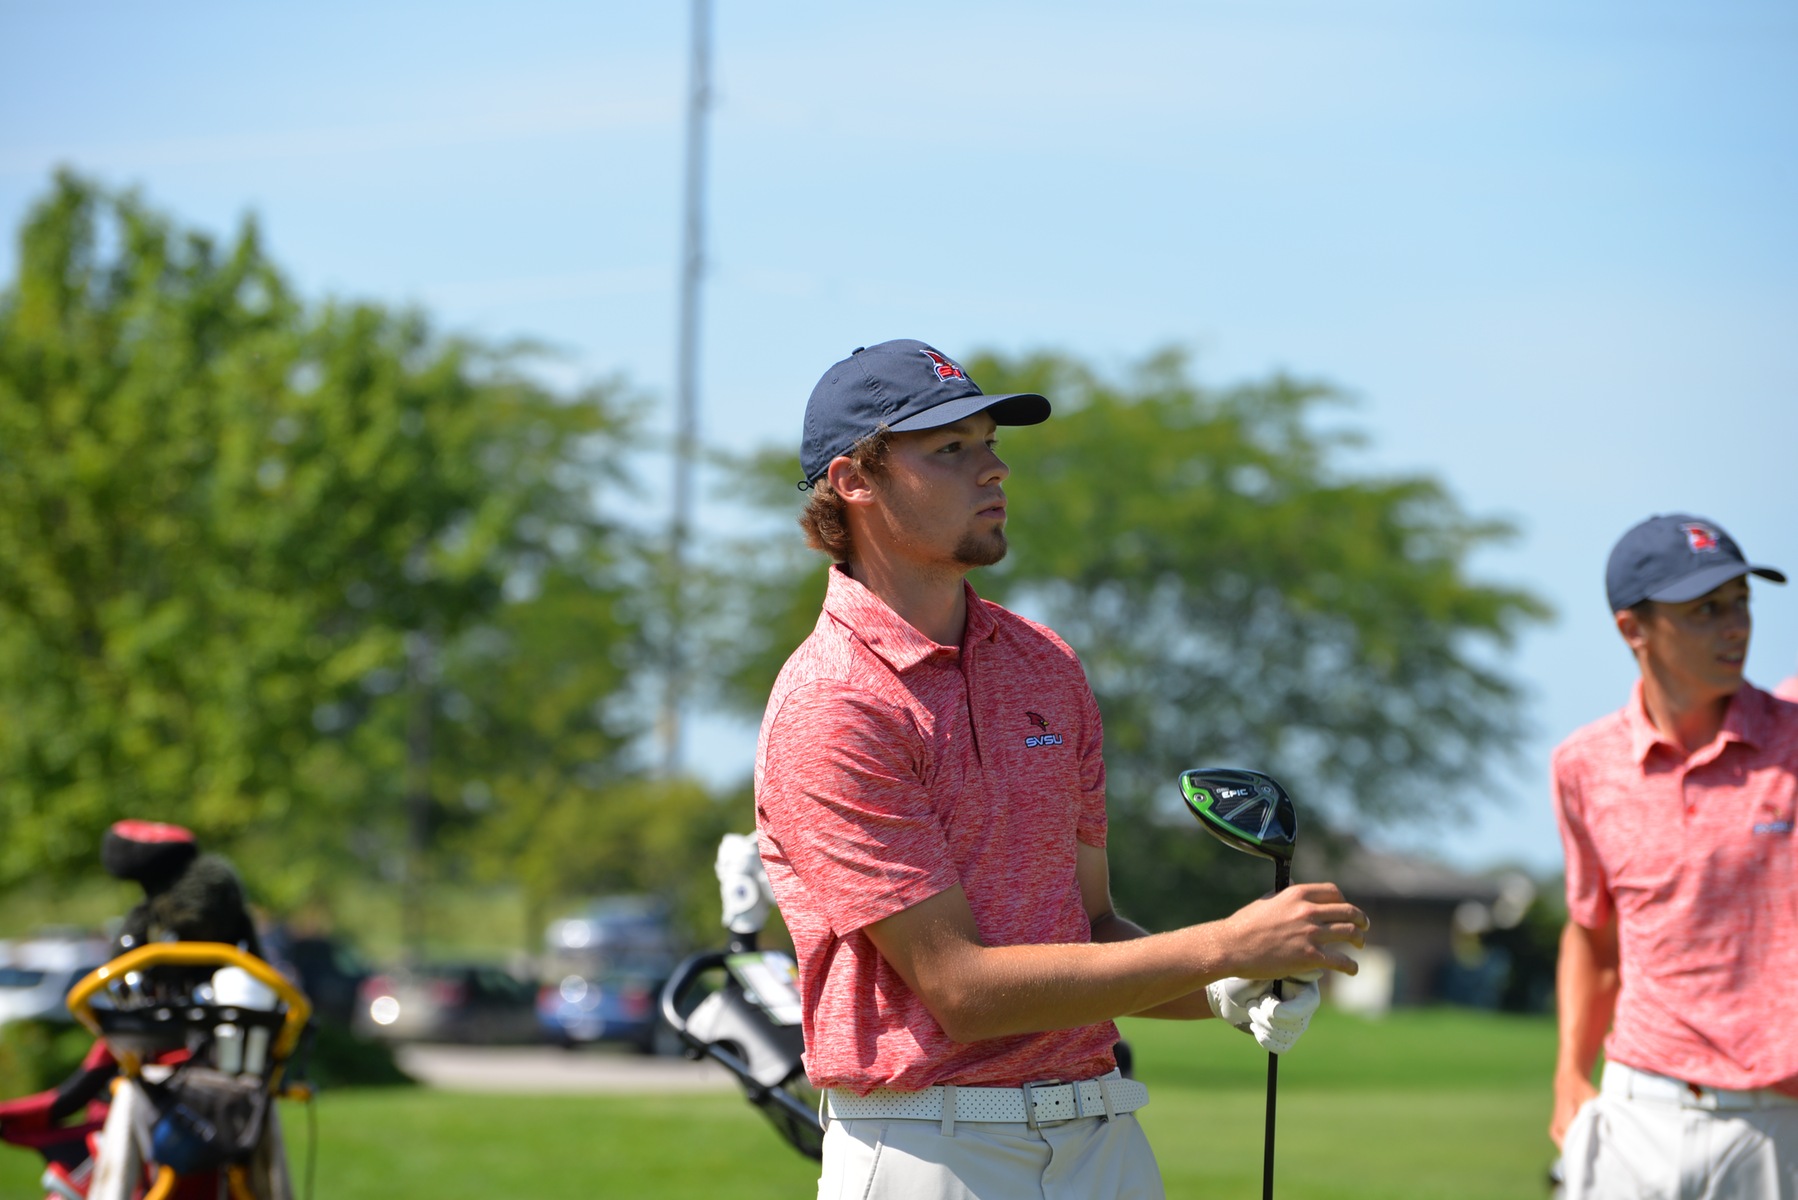 Men's Golf sits fourth after opening round of Parkside Spring Invitational